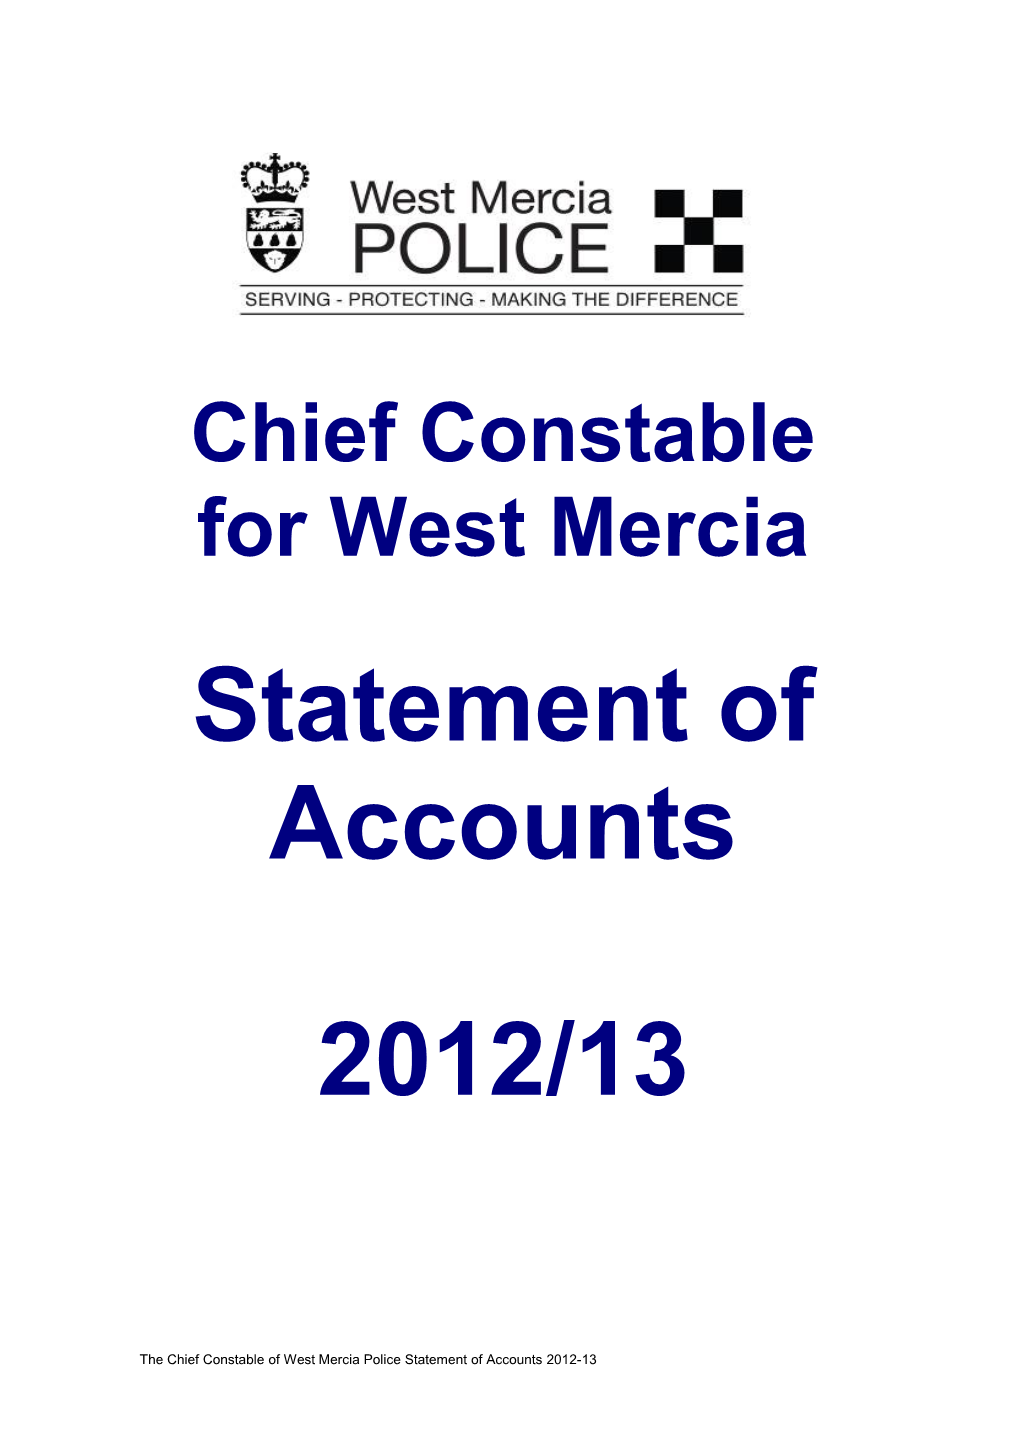 Chief Constable for West Mercia